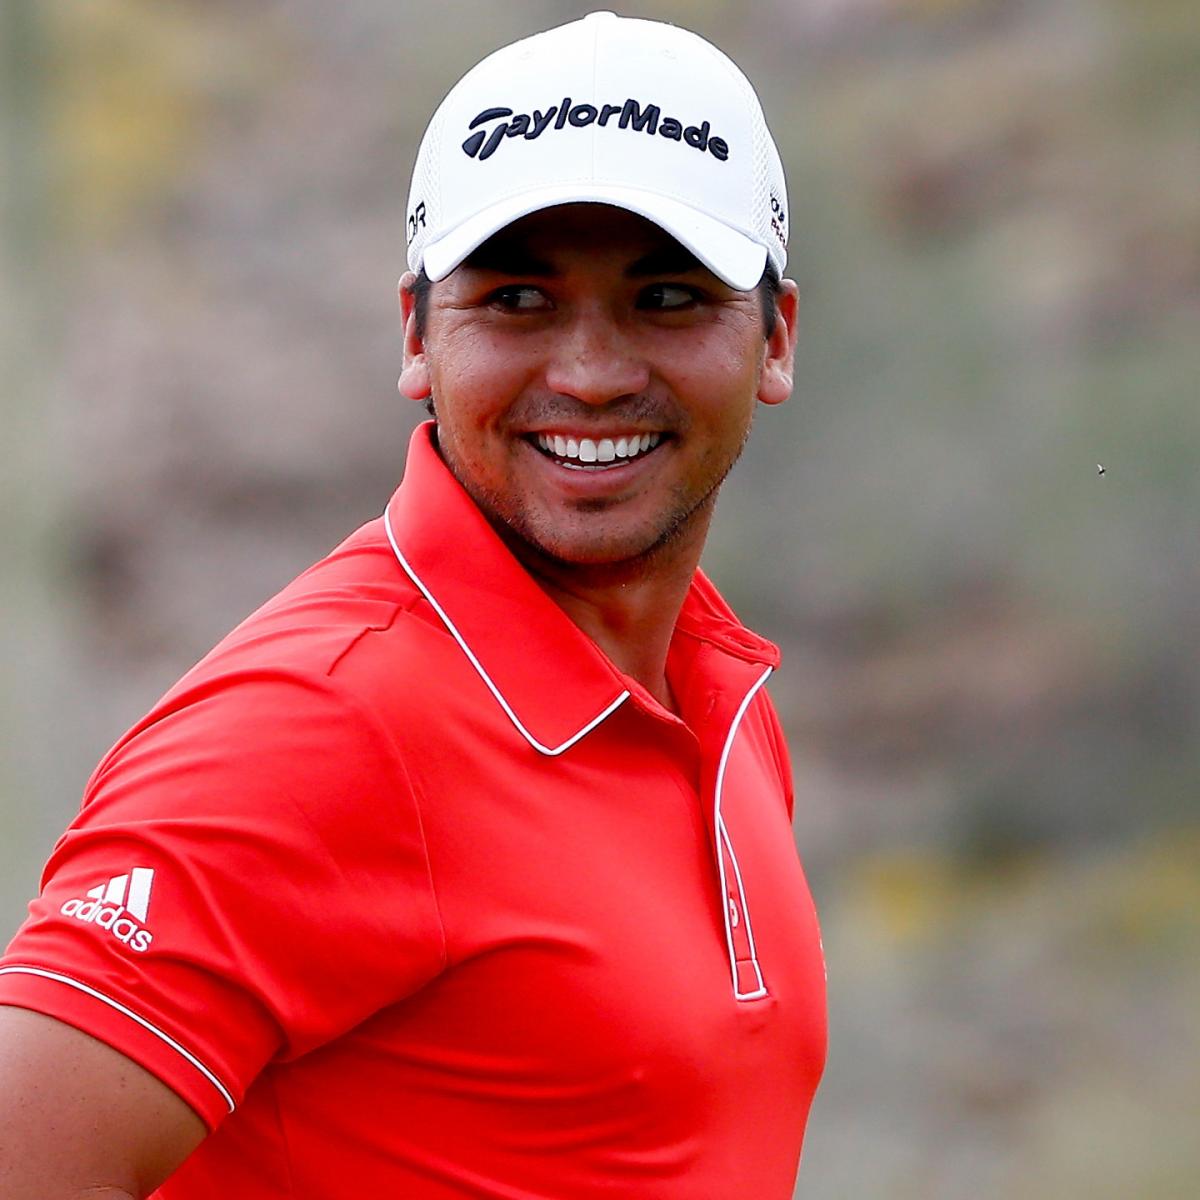 Is Jason Day Ready to Complete Improbable Journey and Win the 2014